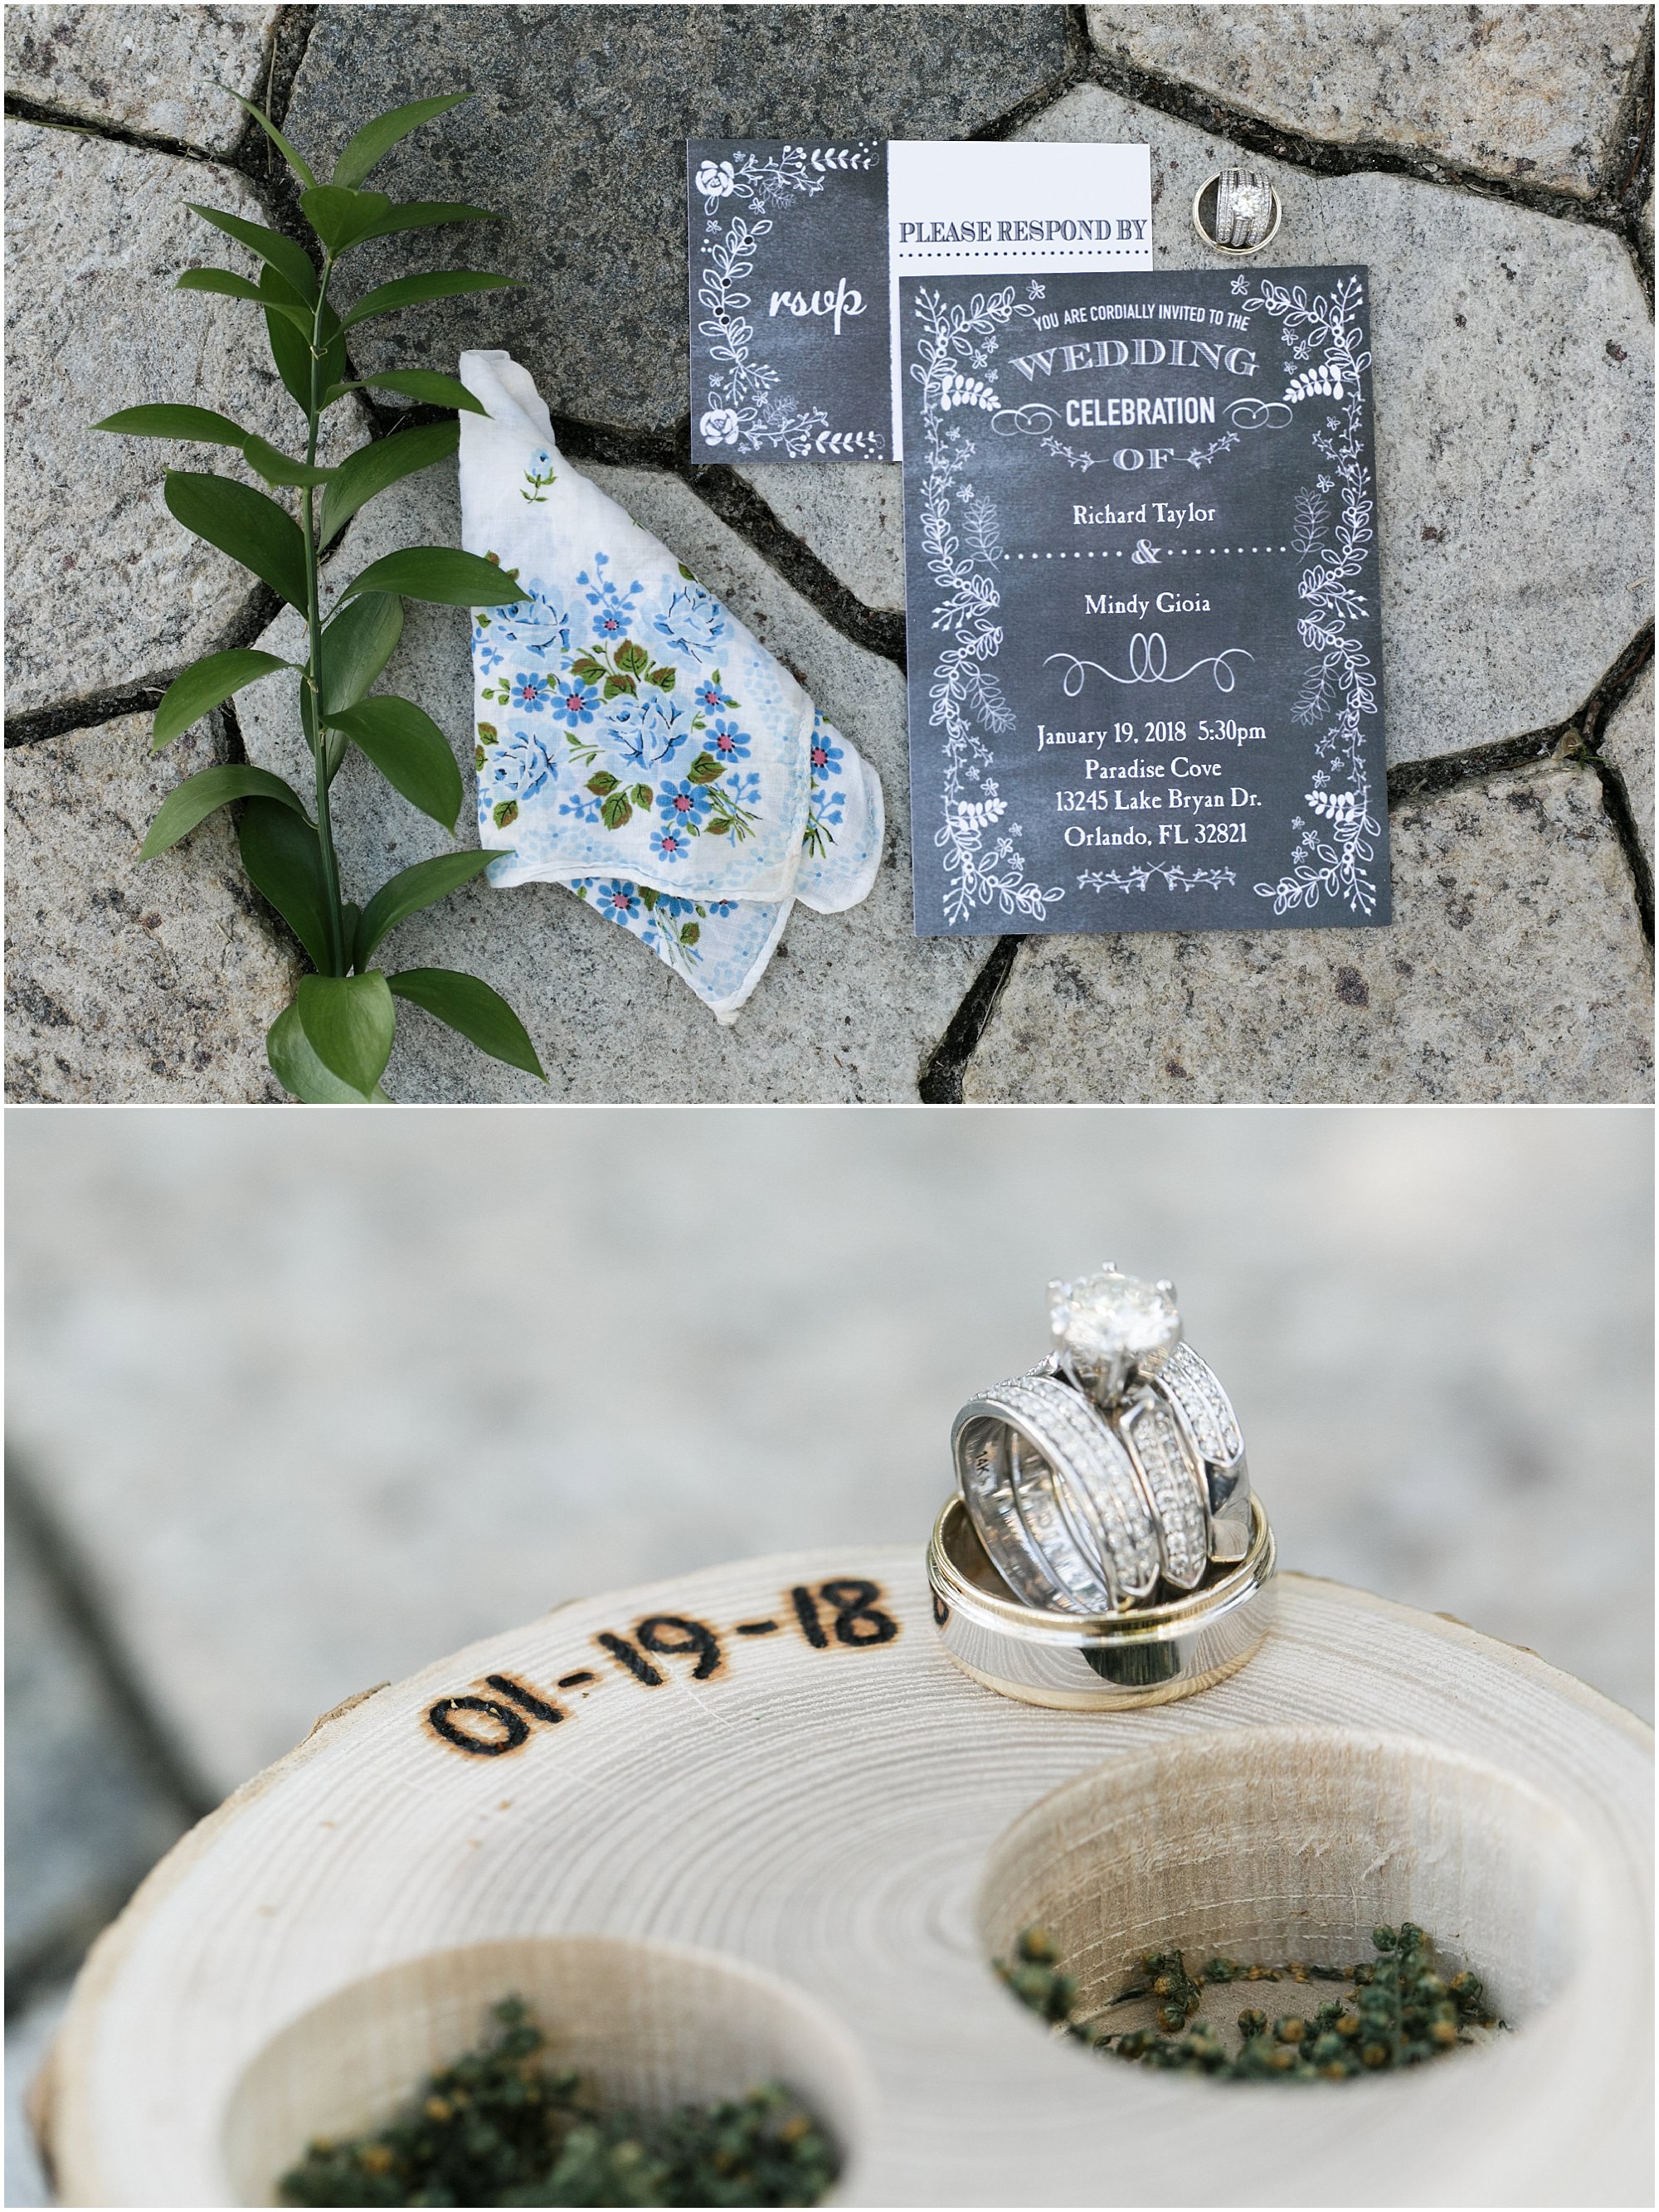 Beautiful Waterfront Wedding invitations for wedding along with wedding accessories. 